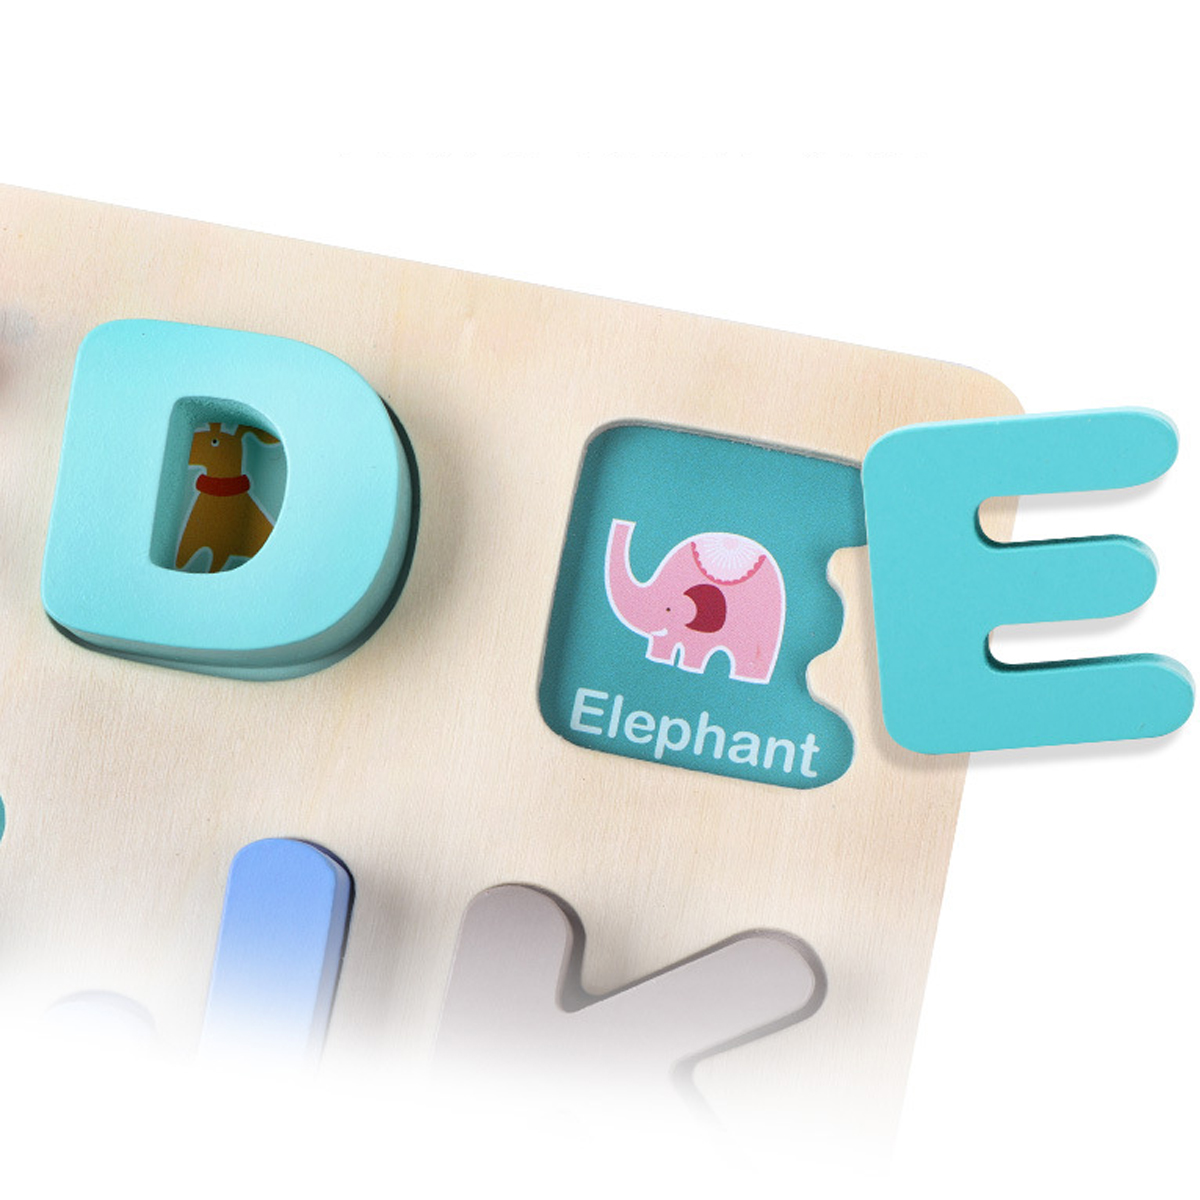 Alphanumeric-Board-Wooden-Jigsaw-Volume-Wooden-Baby-Young-Children-Early-Education-Educational-Toys-1635558-7